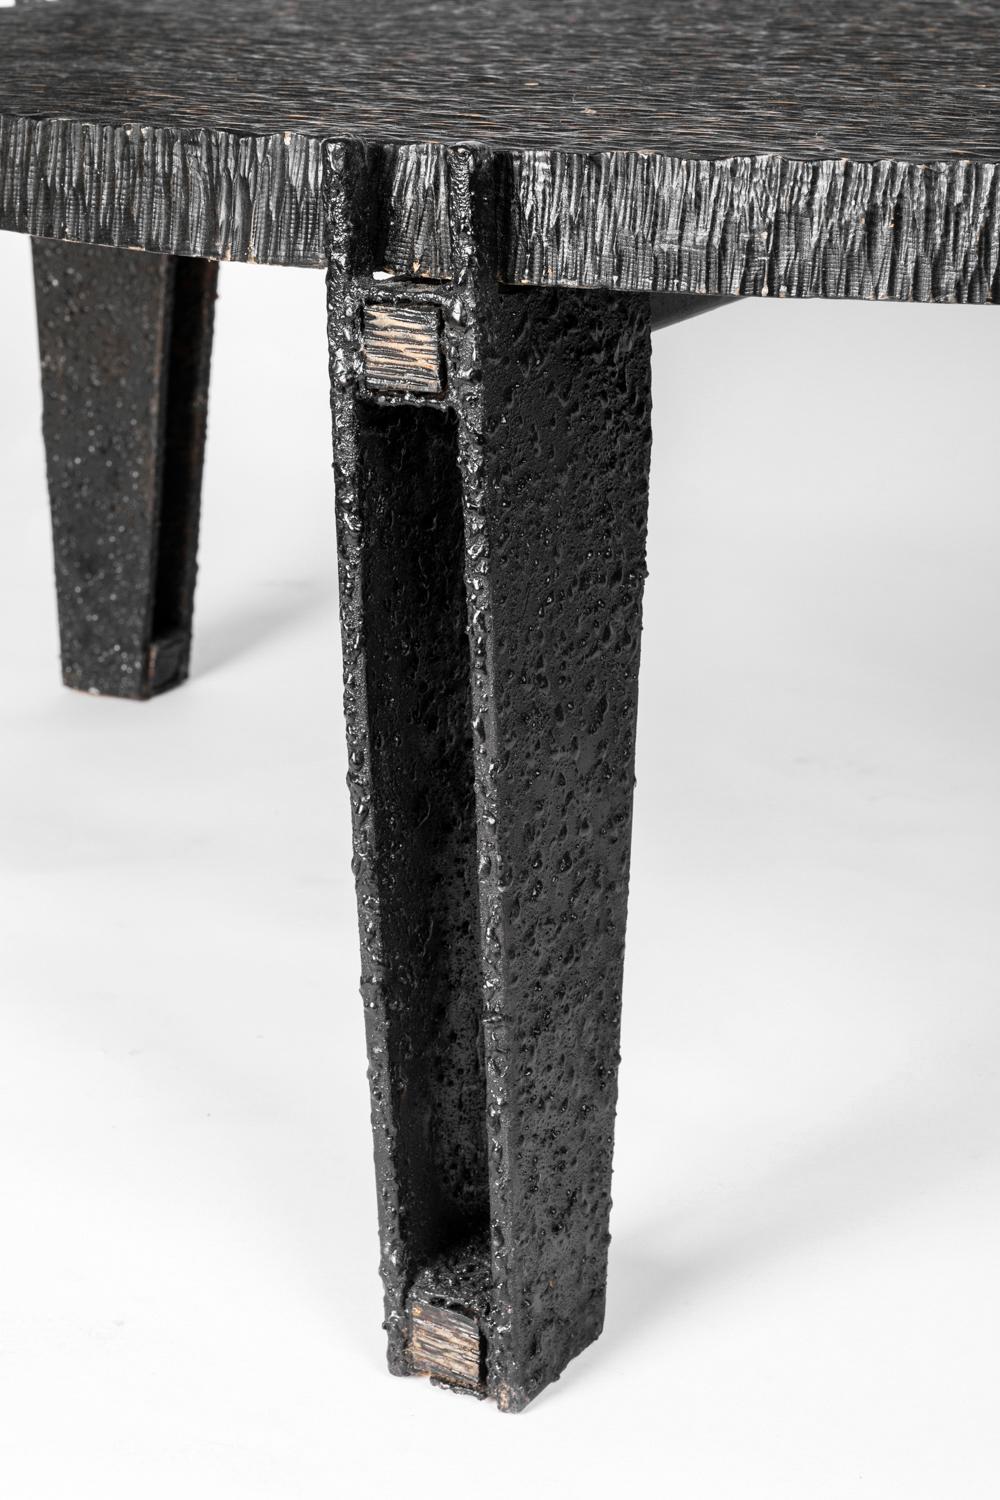 Metal Blackened Gouged Wood Coffee Table, Contemporary Work